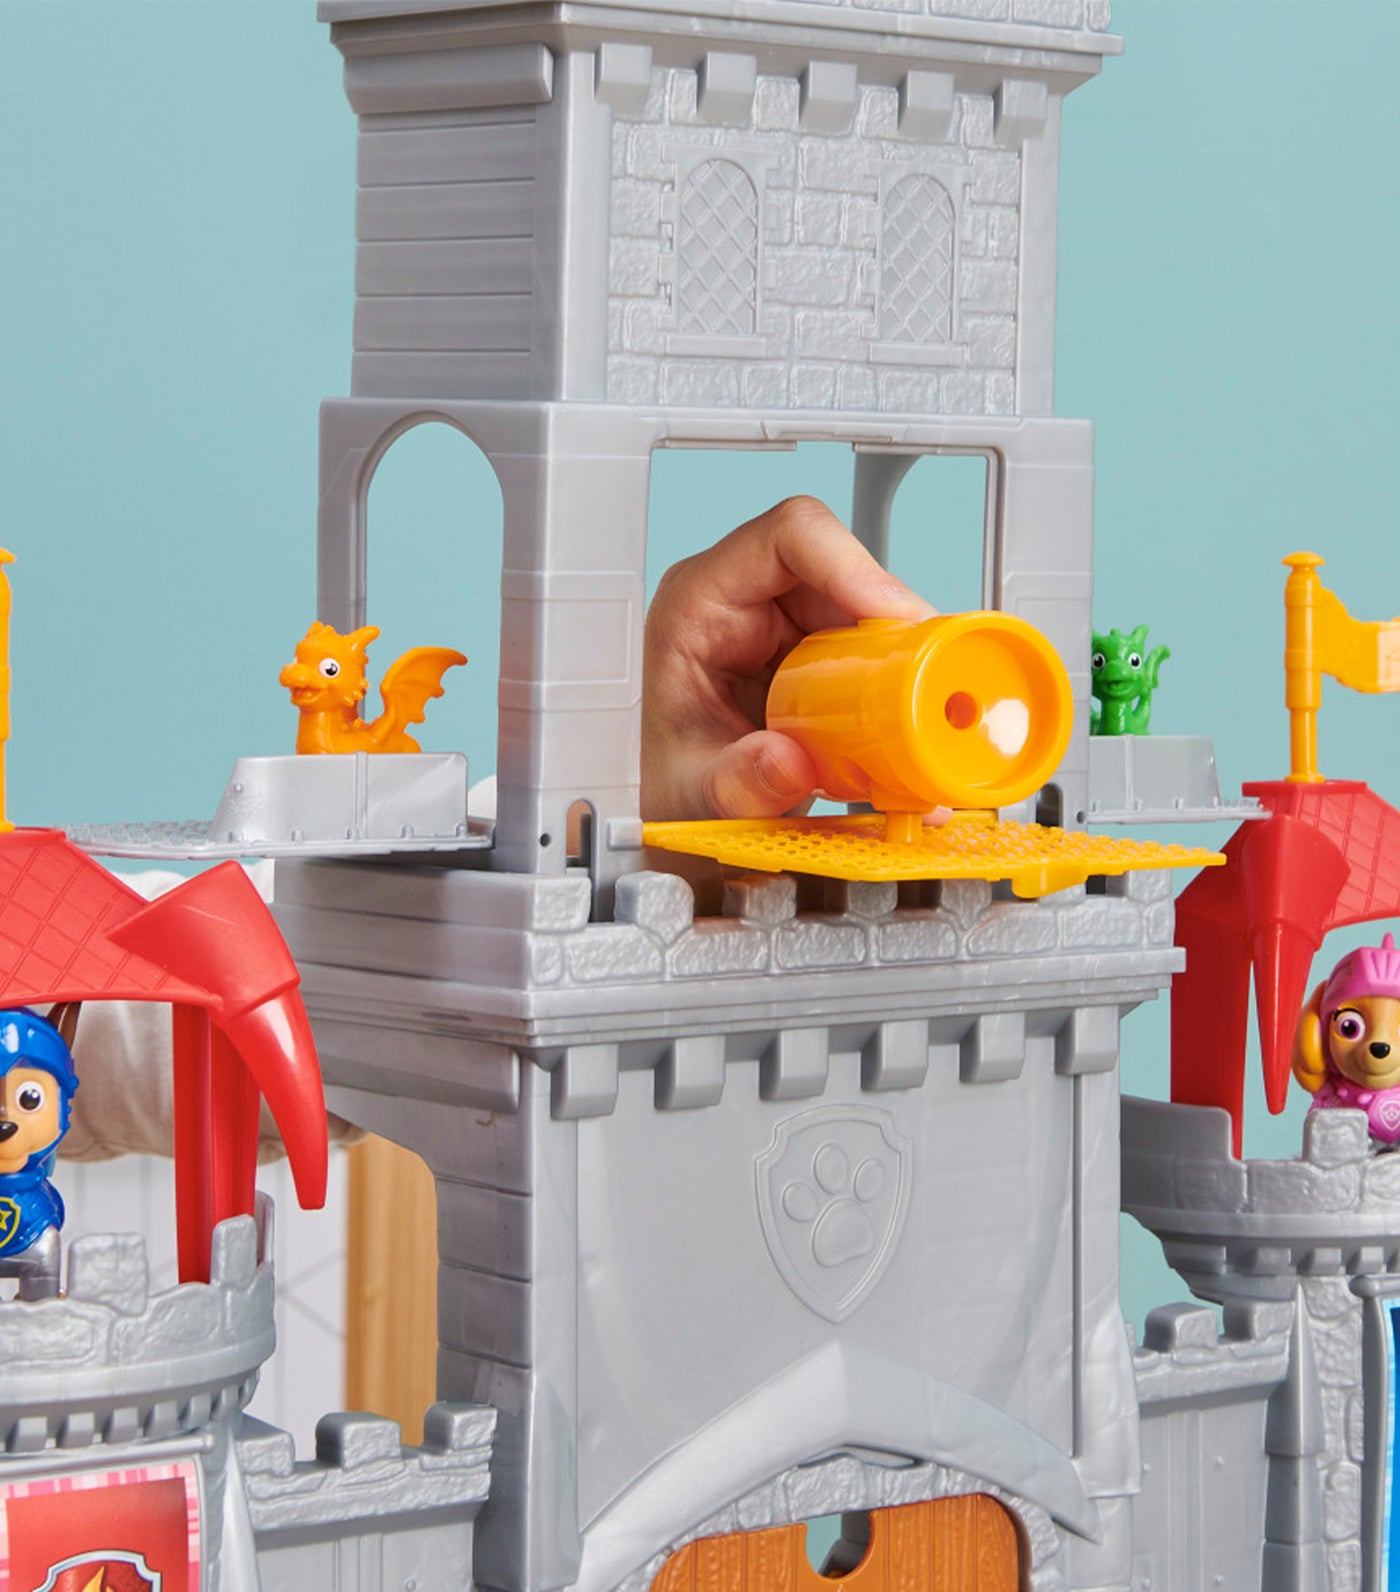  Paw Patrol, Rescue Knights Castle HQ Transforming 11-Piece  Playset with Chase and Mini Dragon Draco Action Figures, Kids Toys for Ages  3 and up : Toys & Games